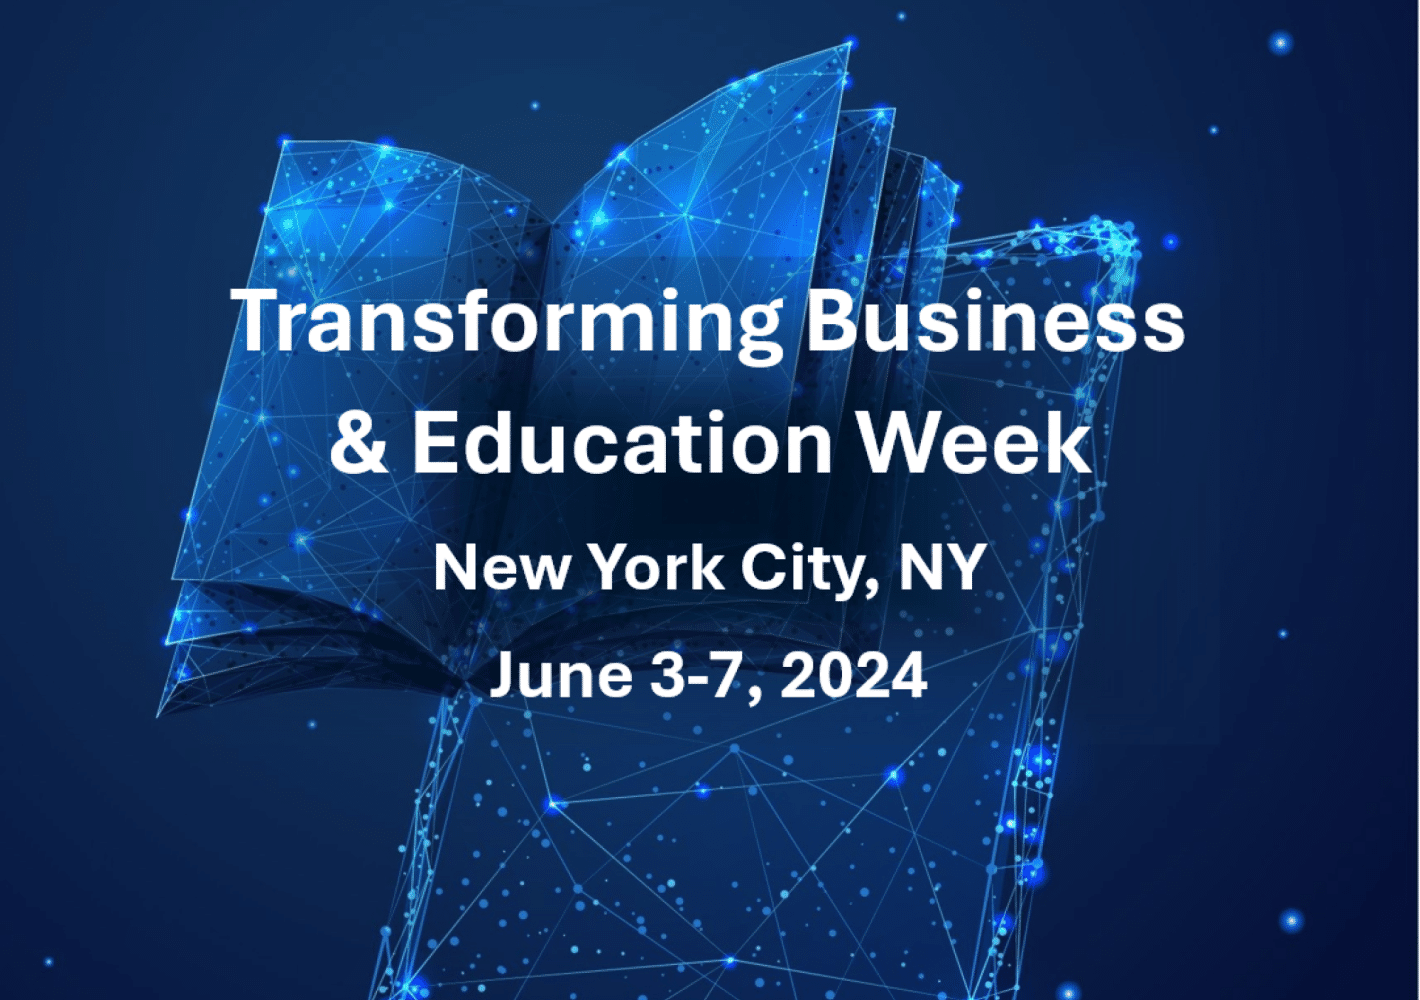 Transforming Business & Education Week 2024 Announcement